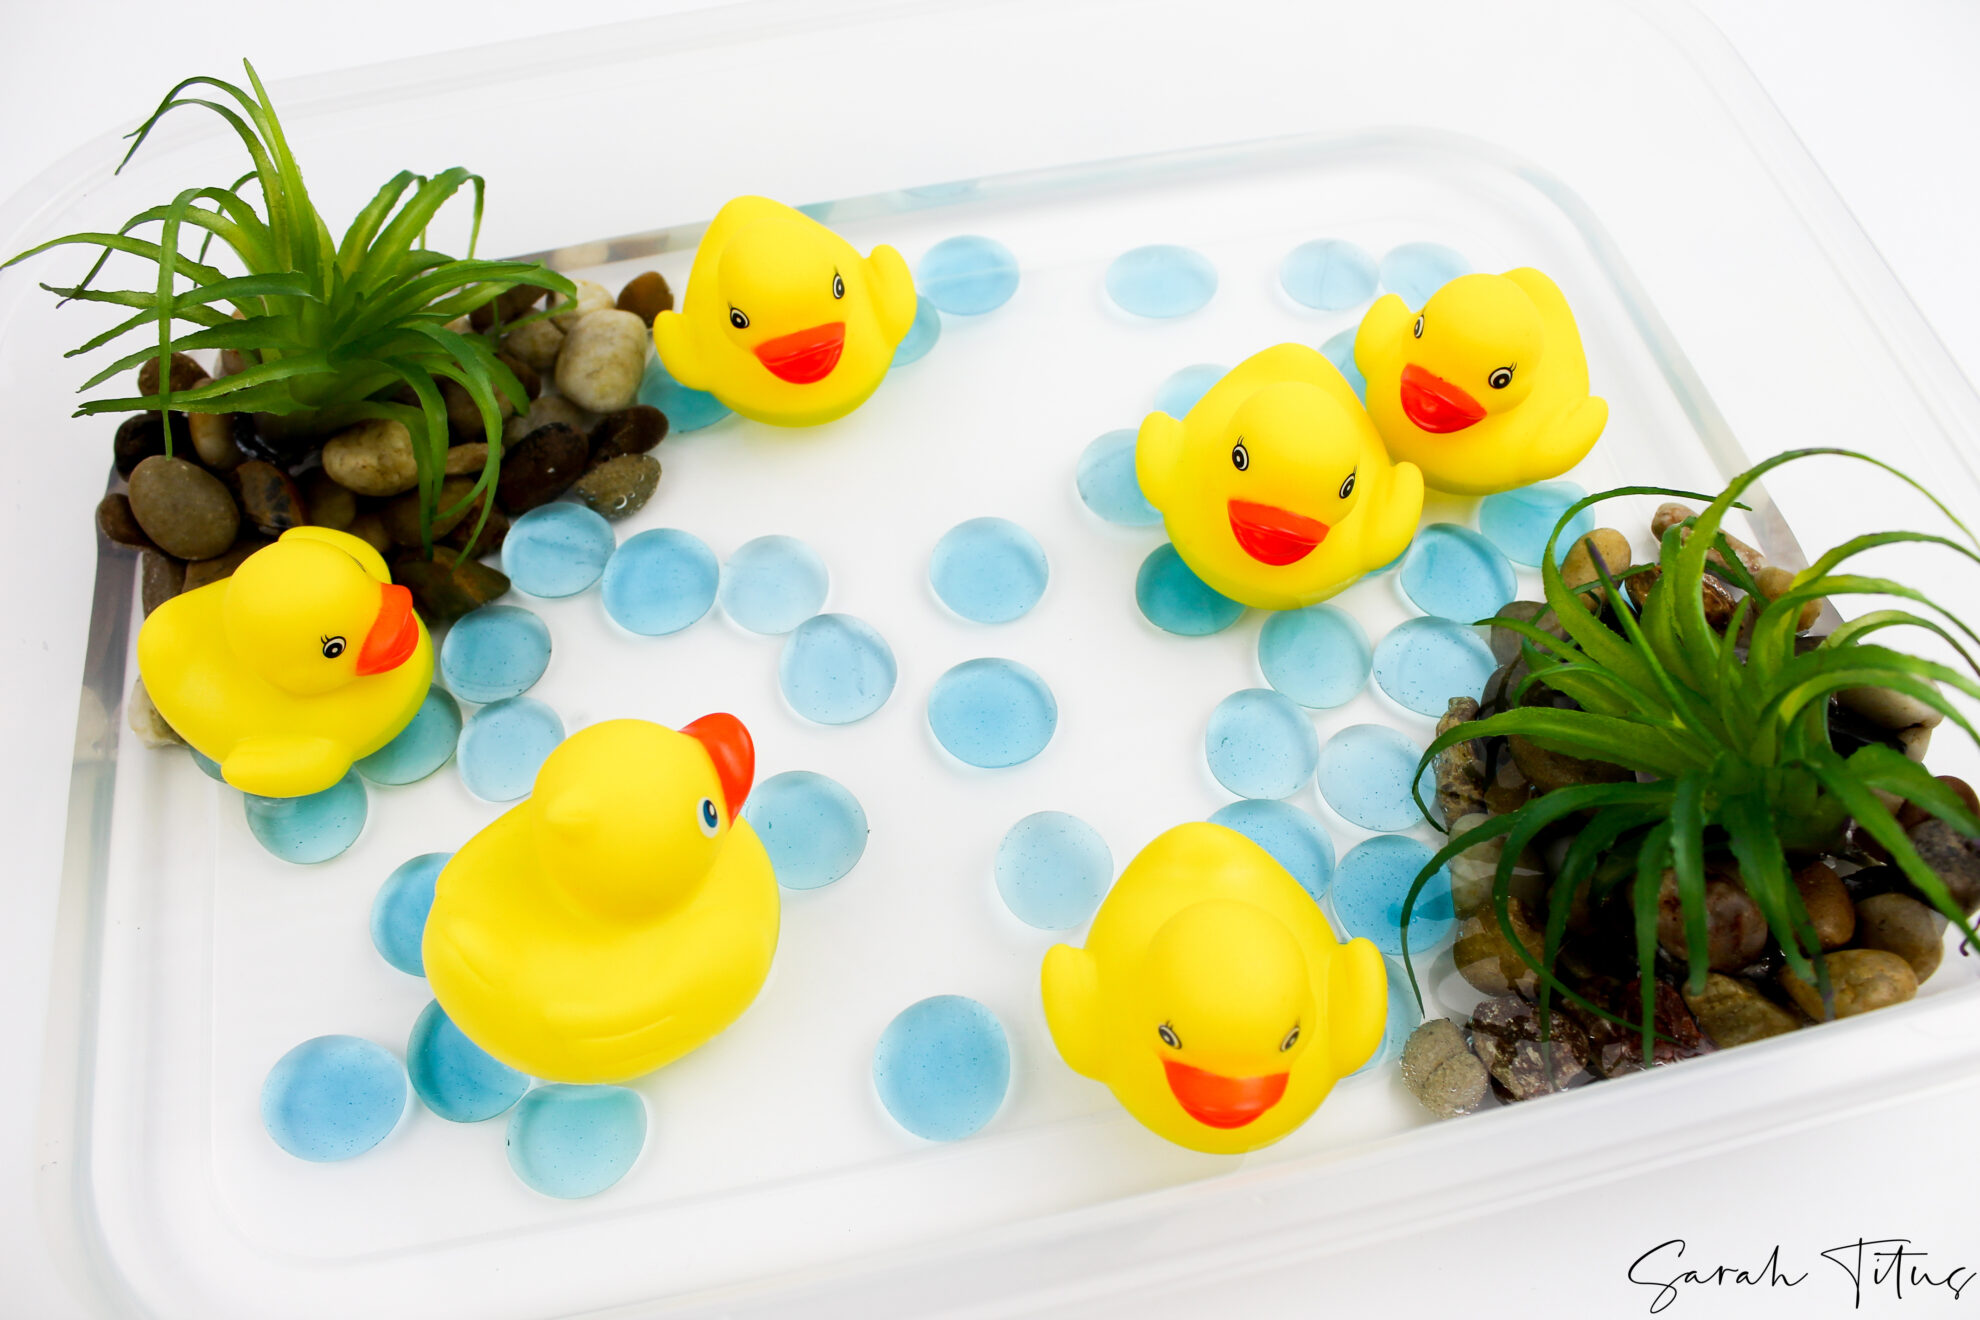 Cute Little Quack Sensory Play For Toddlers